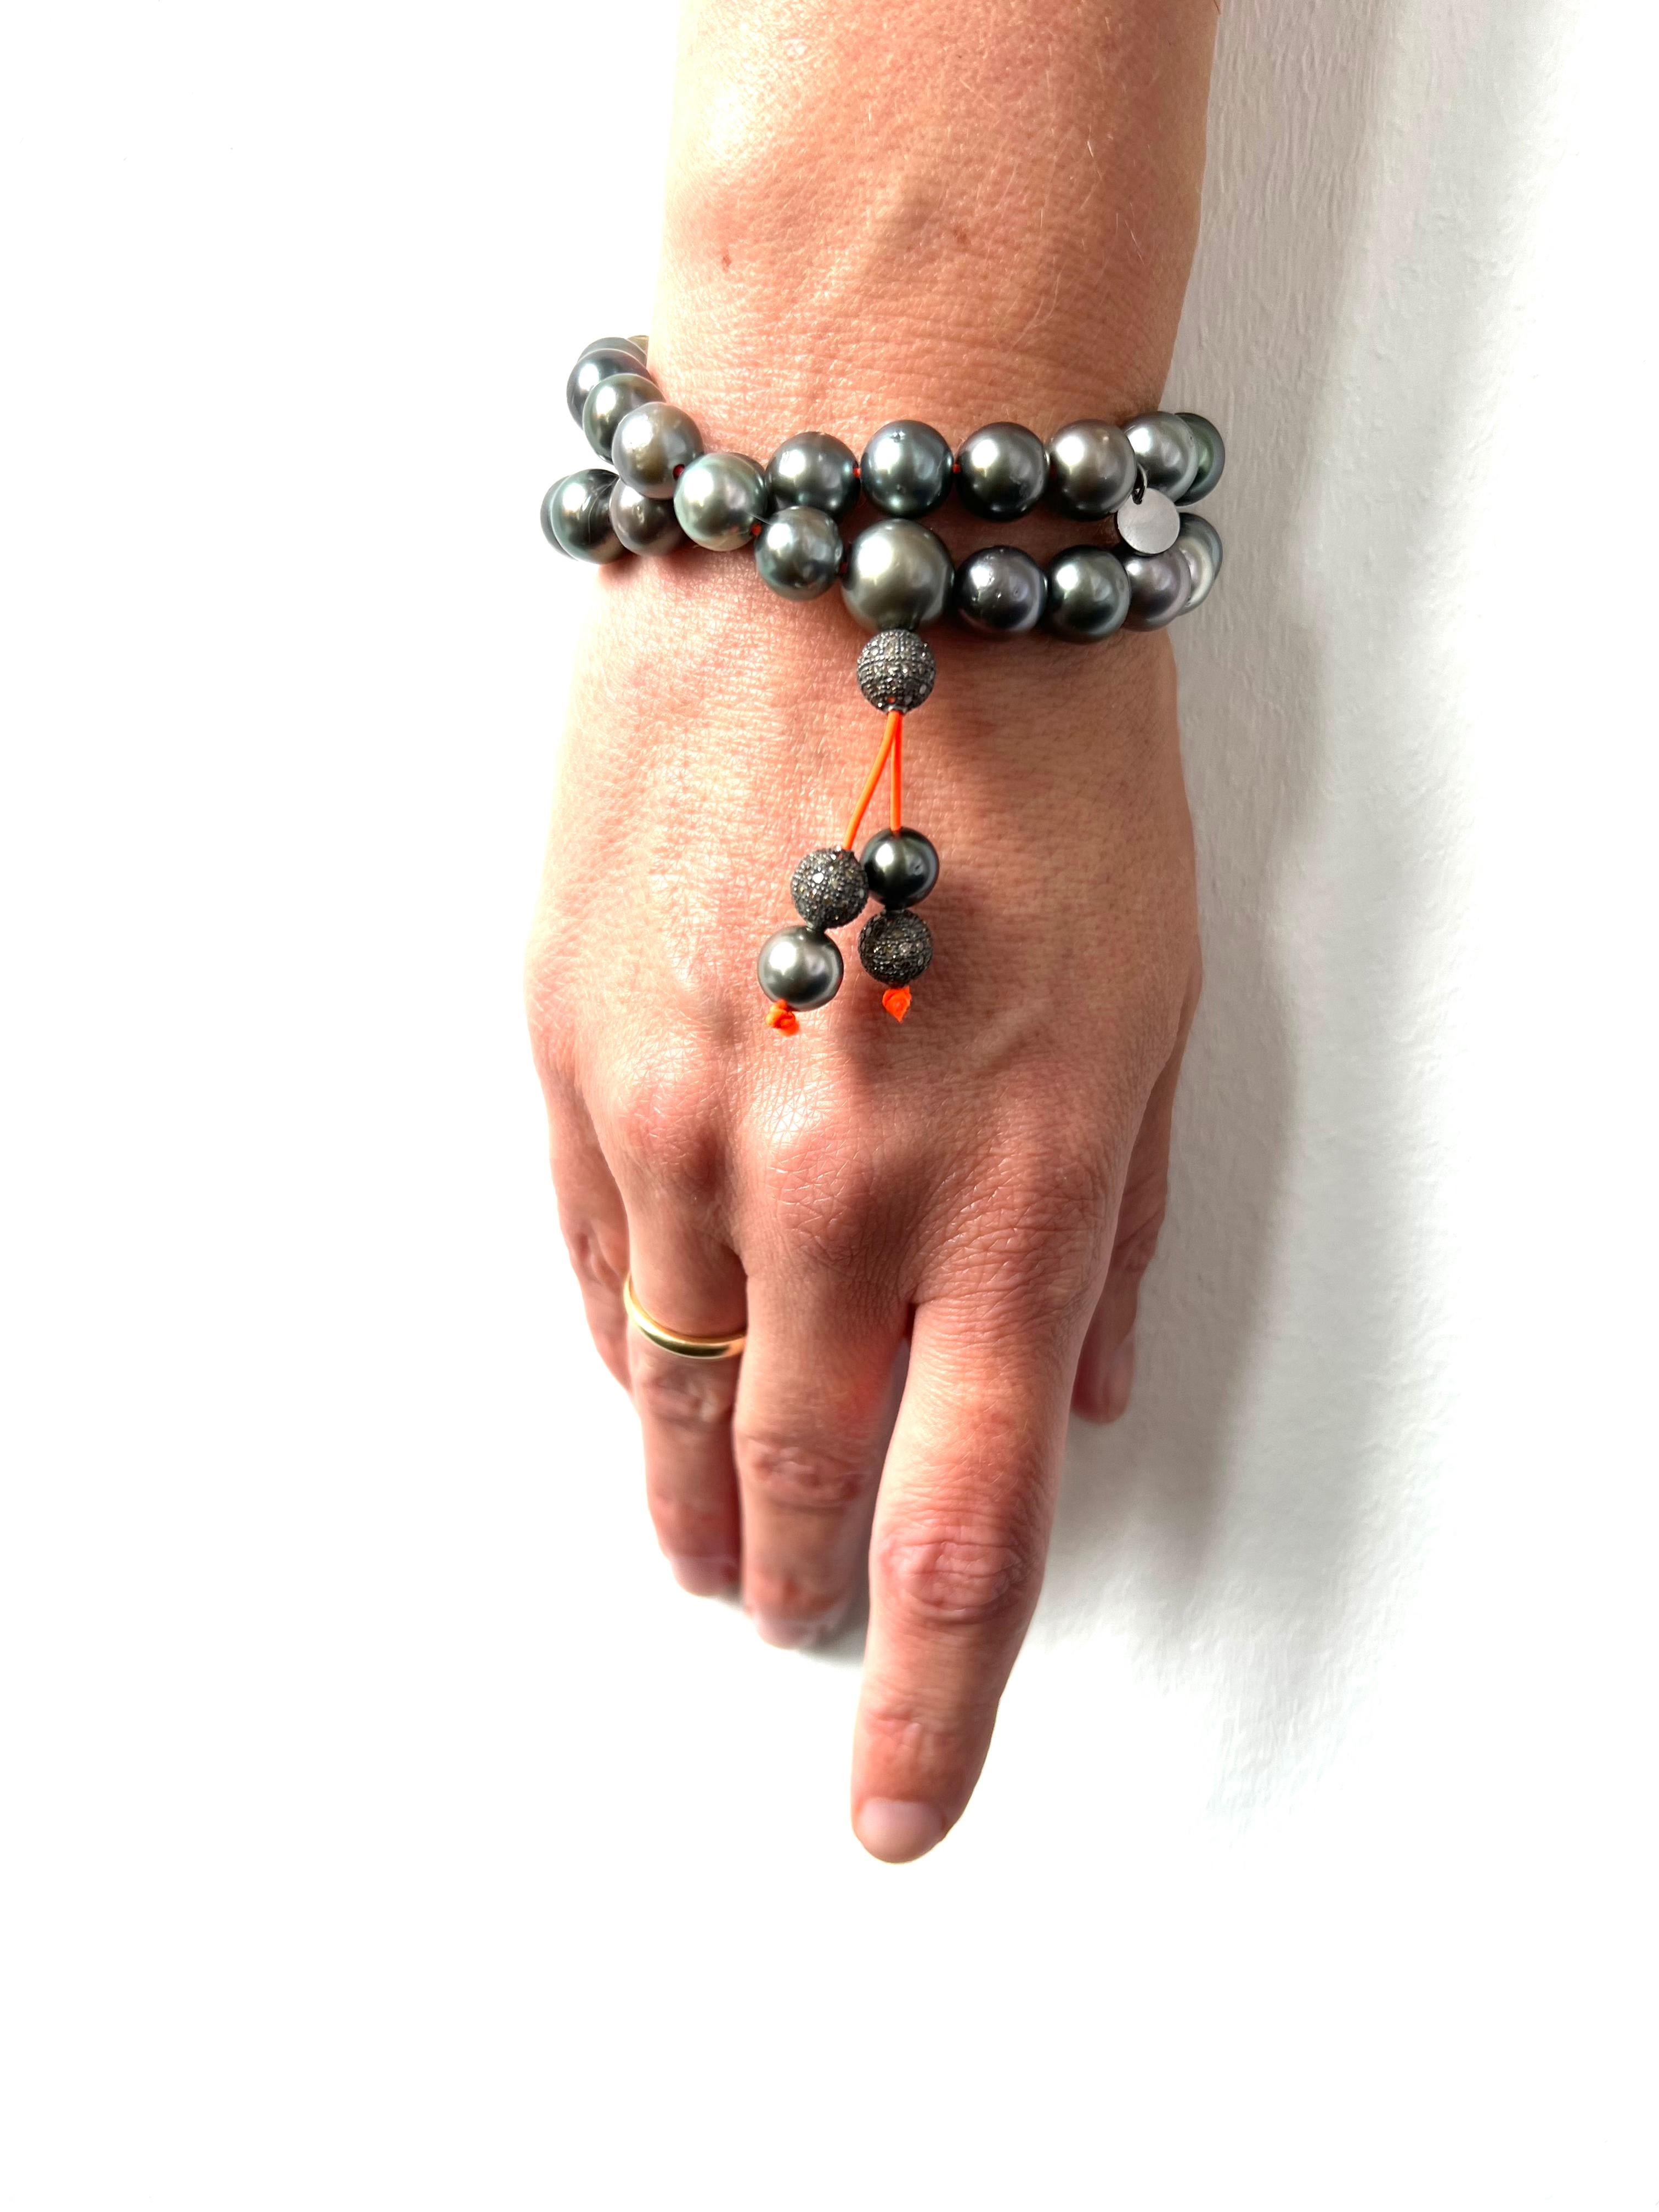 Bead Prayer bracelet/necklace with Tahiti pearls and silver encrusted diamond beads For Sale